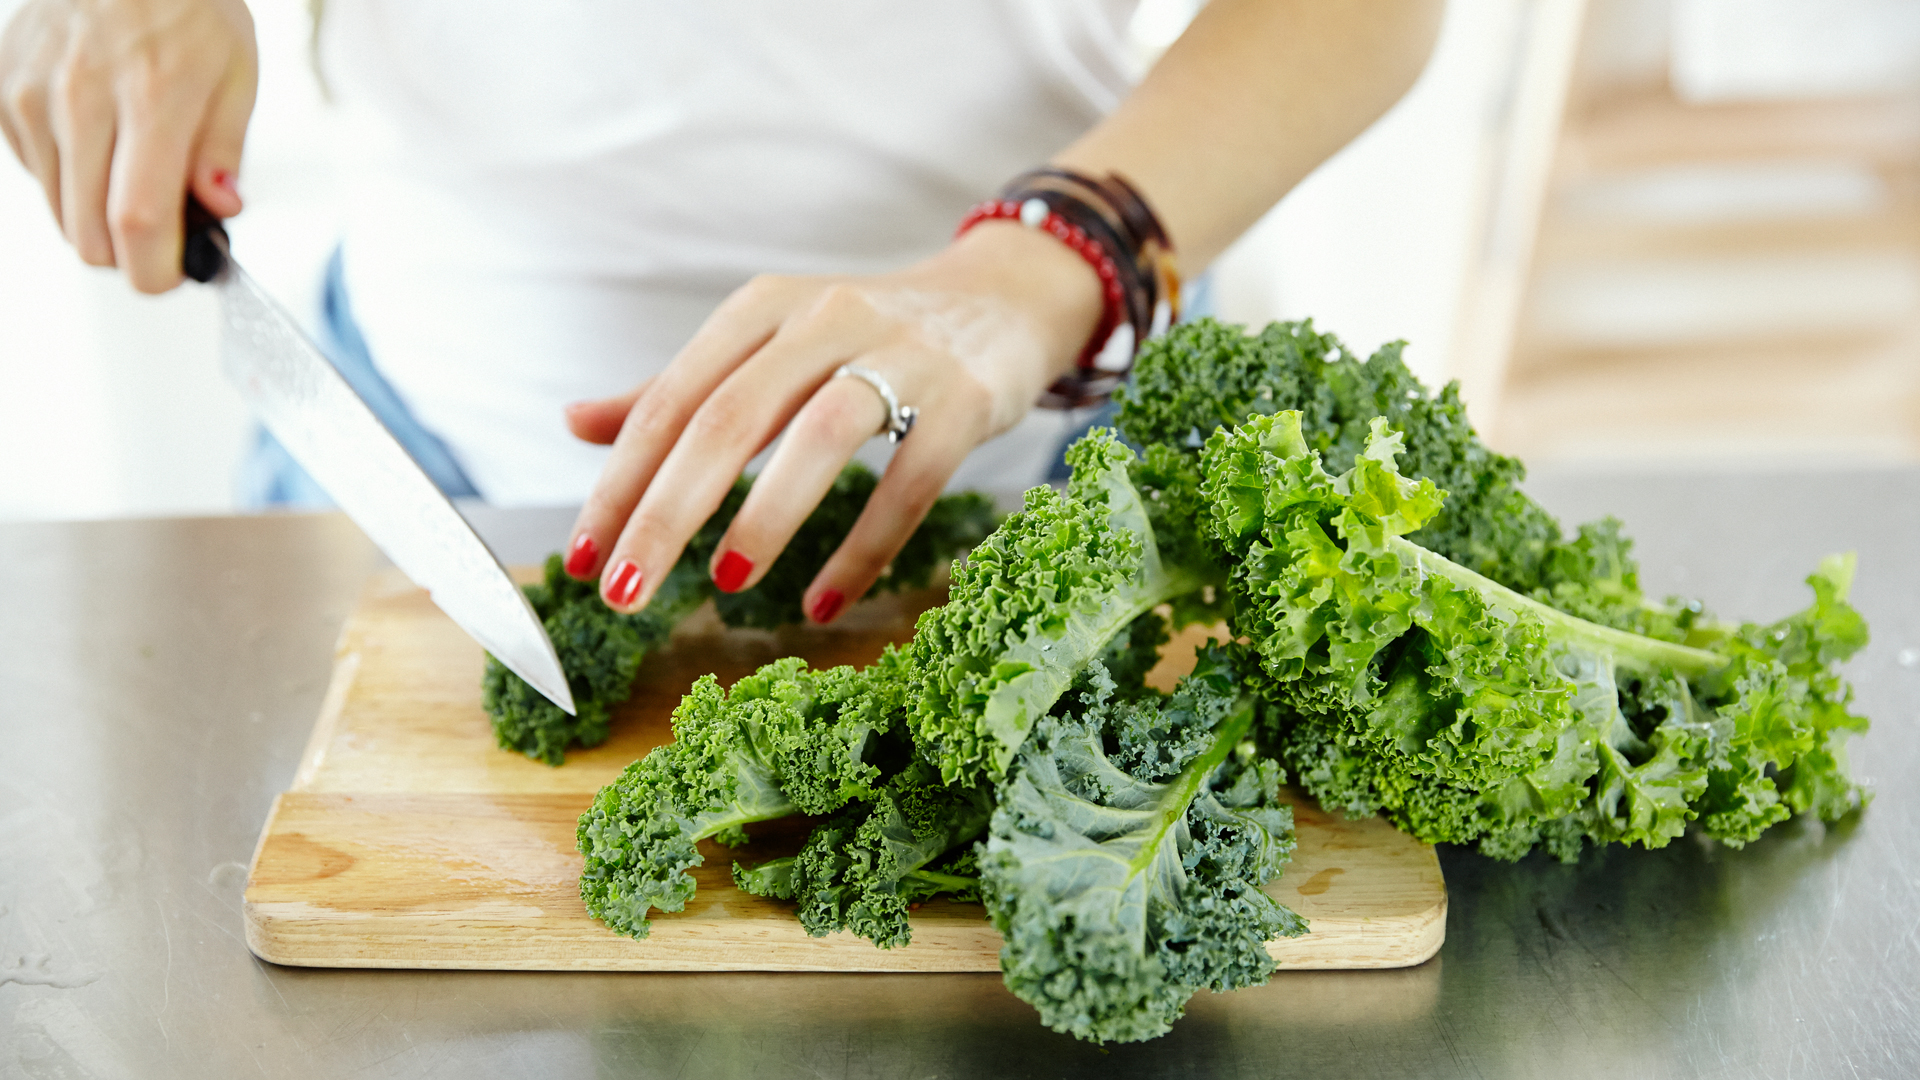 catherine-cuello-chopping-kale-for-her-sweet-potato-kale-and-chives-recipe-foodadit